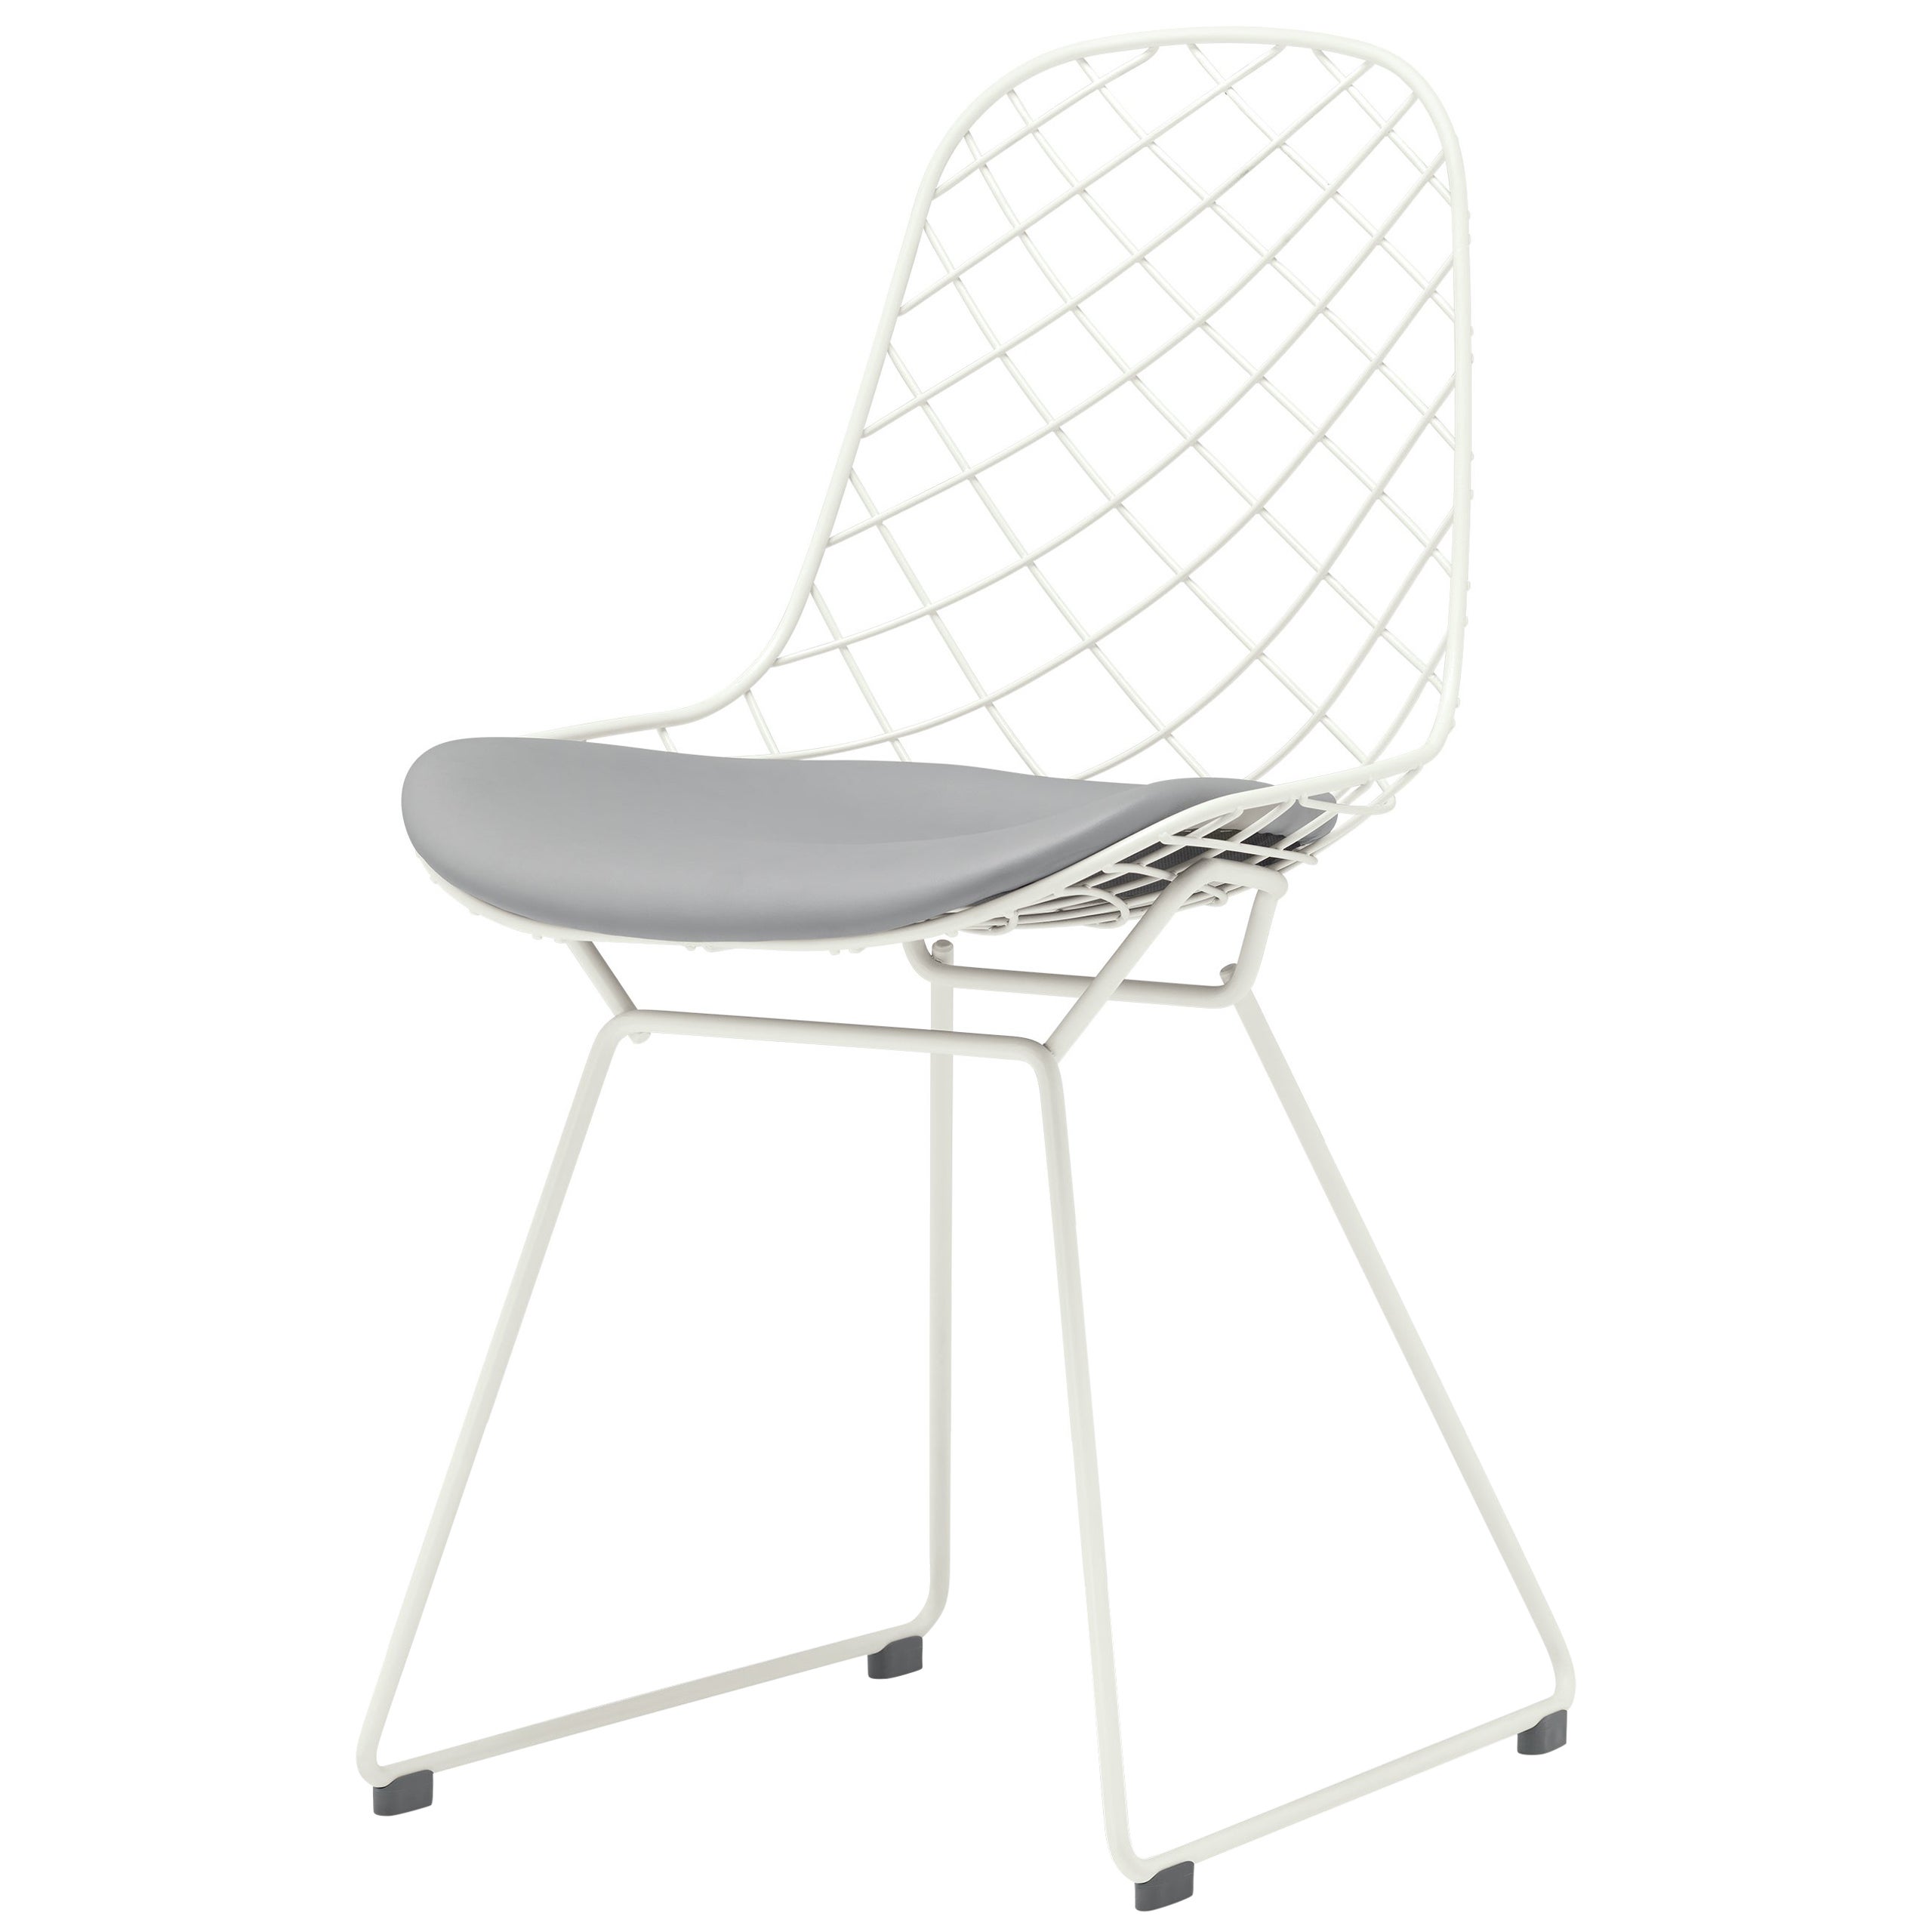 Alias N01 Kobi Sledge Outdoor Chair in Leather Seat with White Lacquered Frame